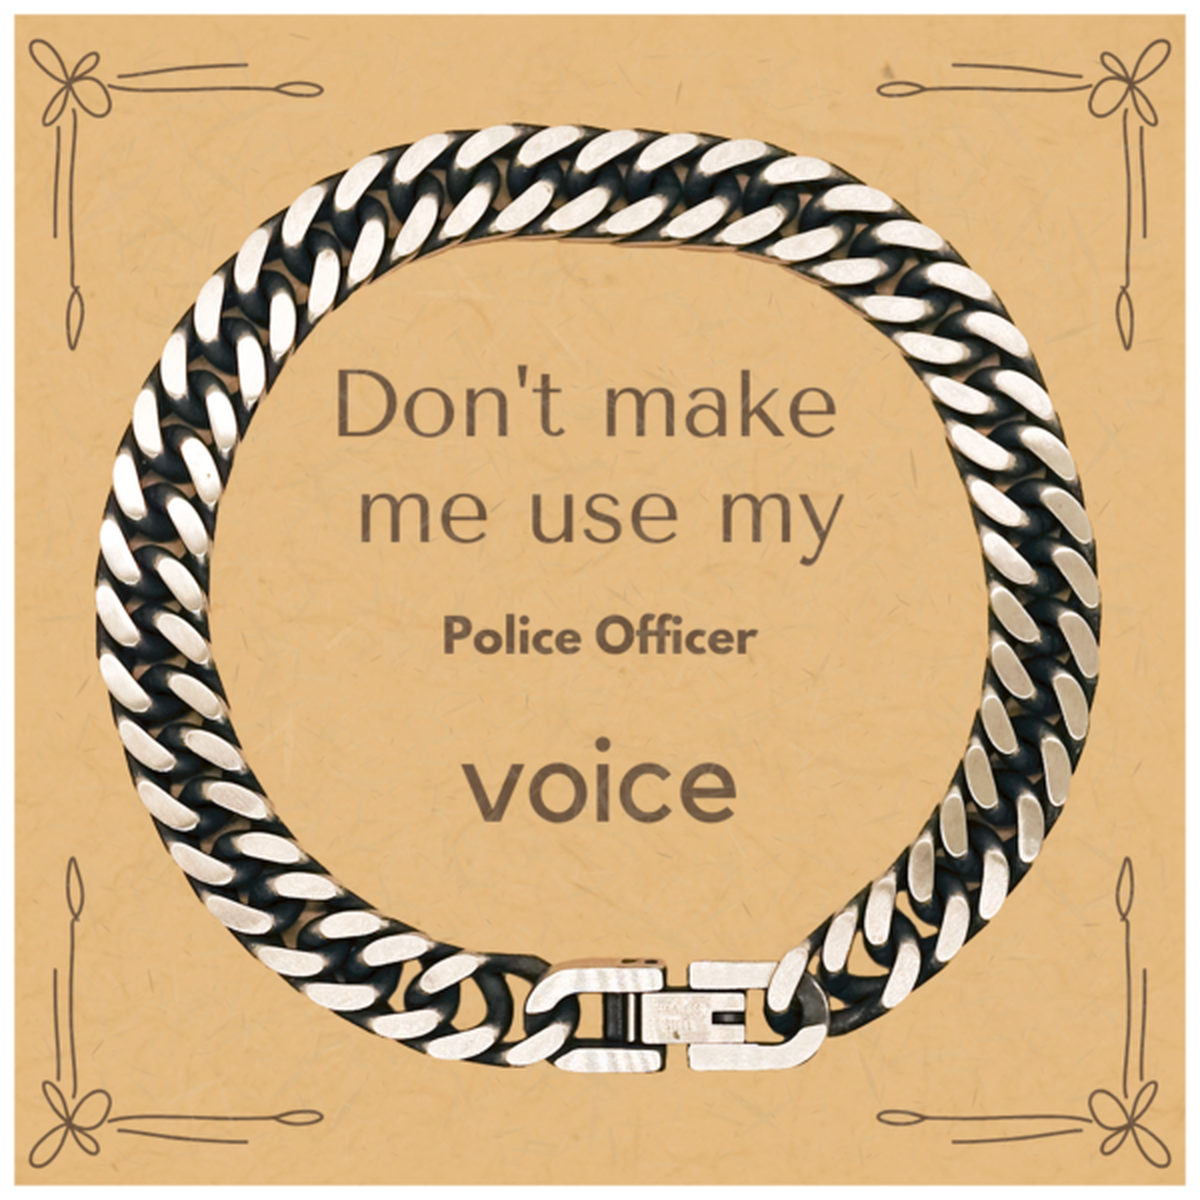 Don't make me use my Police Officer voice, Sarcasm Police Officer Card Gifts, Christmas Police Officer Cuban Link Chain Bracelet Birthday Unique Gifts For Police Officer Coworkers, Men, Women, Colleague, Friends